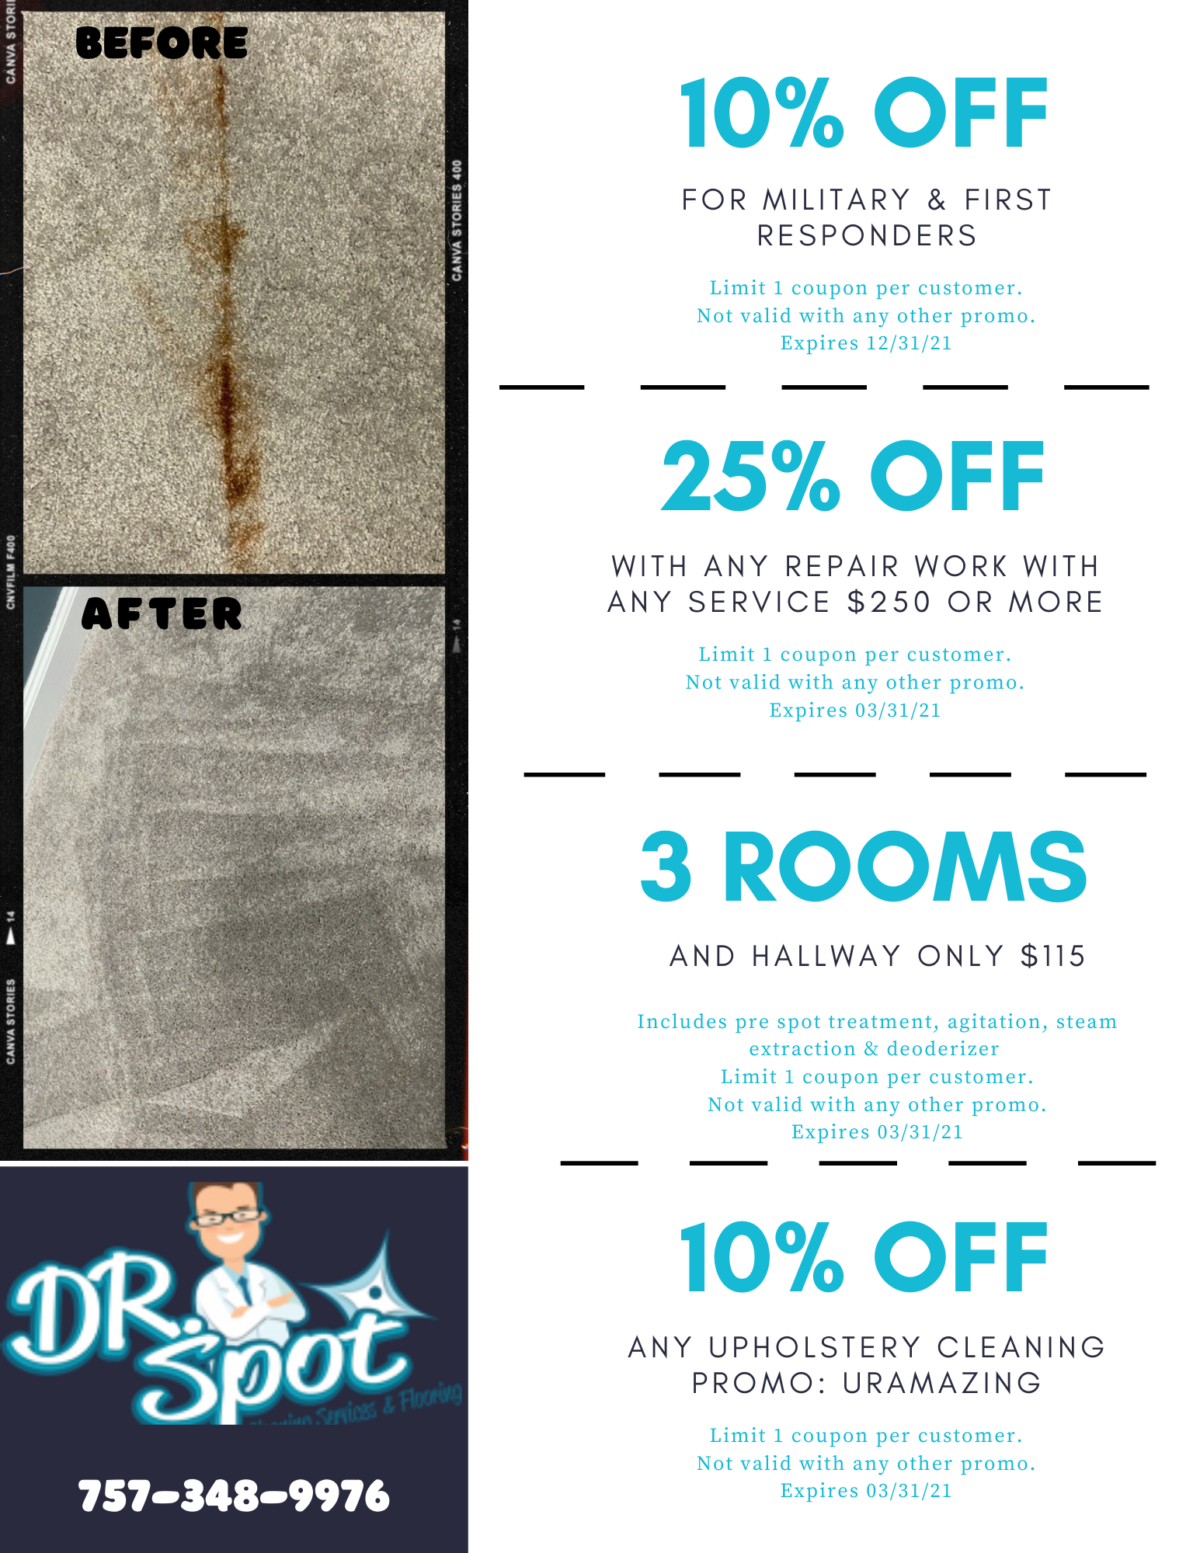 spotoff carpet cleaning coupons